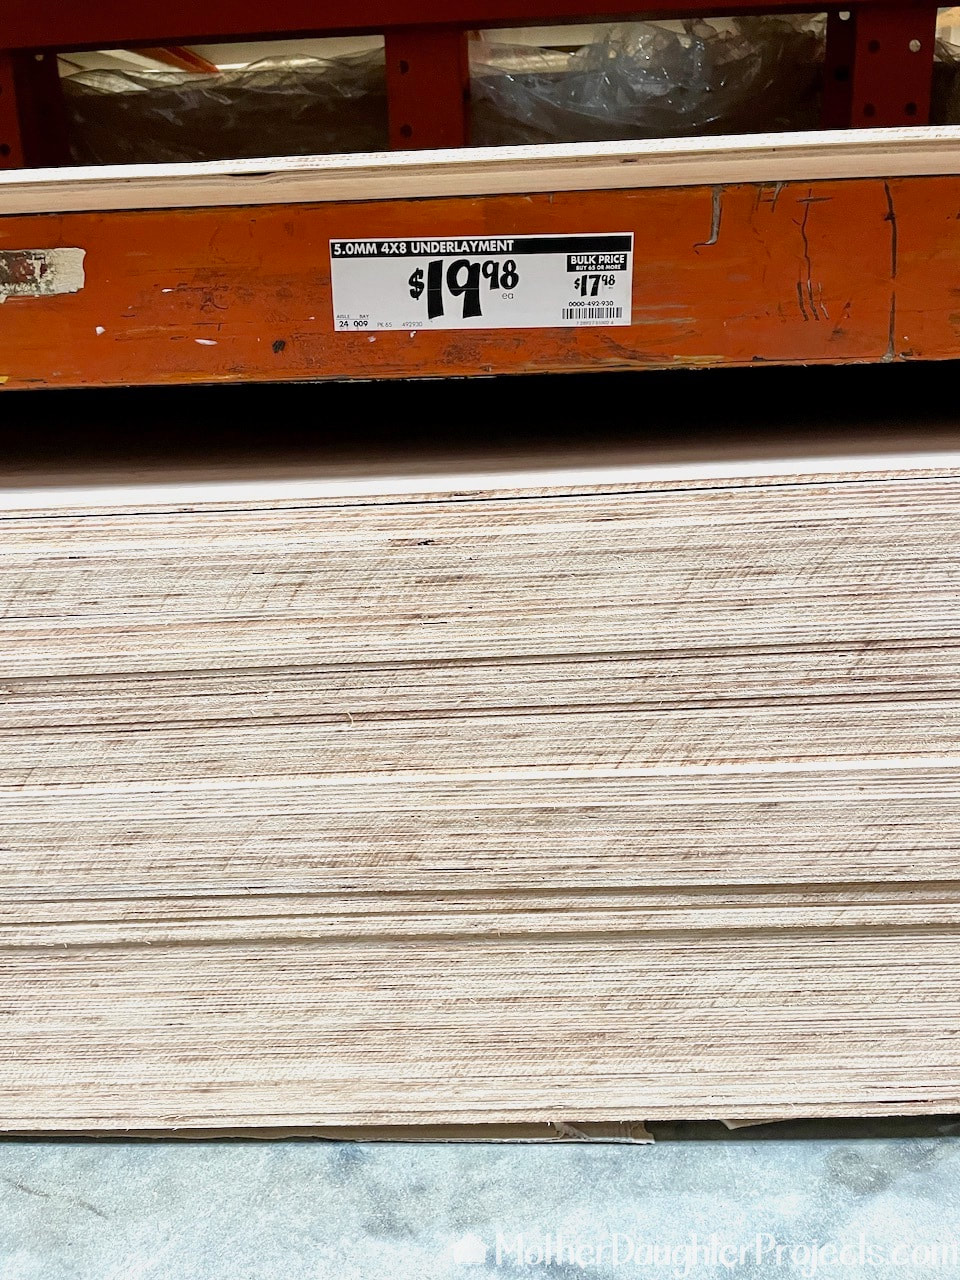 We purchased our materials at the Home Depot. We bought a sheet of underlayment.